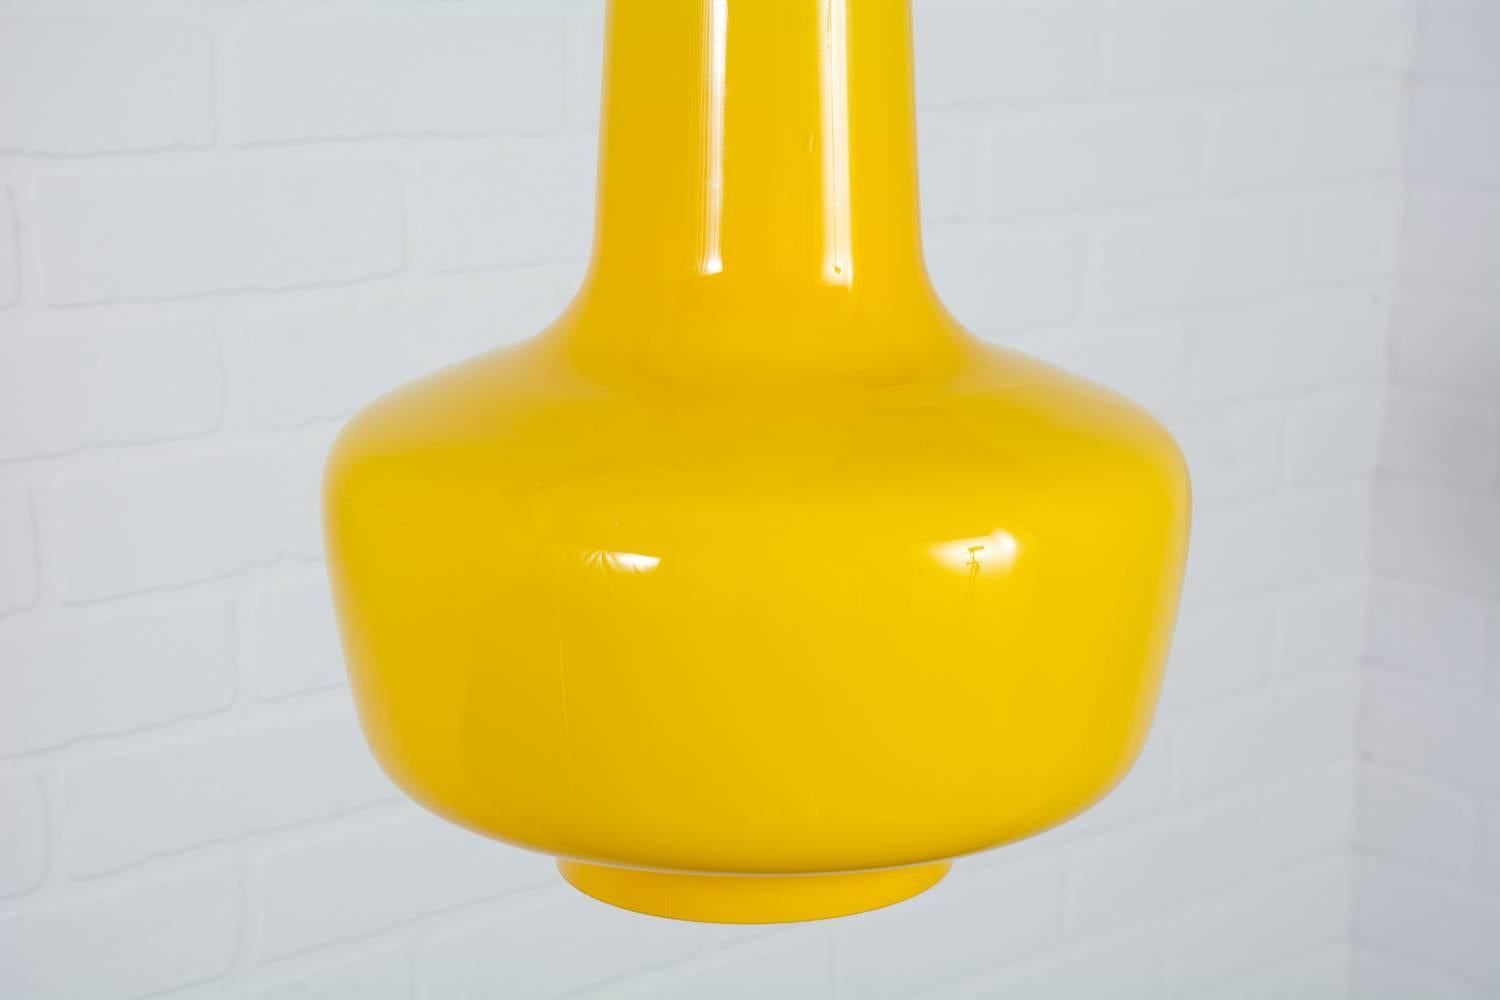 This Danish Modern 'Kreta' hanging lamp was designed by Jacob E. Bang for Fog and Mørup in the 1960s. It was manufactured by Holmegaard Denmark. This vintage Mid-Century pendant lamp has a funnel shape in a vibrant canary yellow. The glass pendant